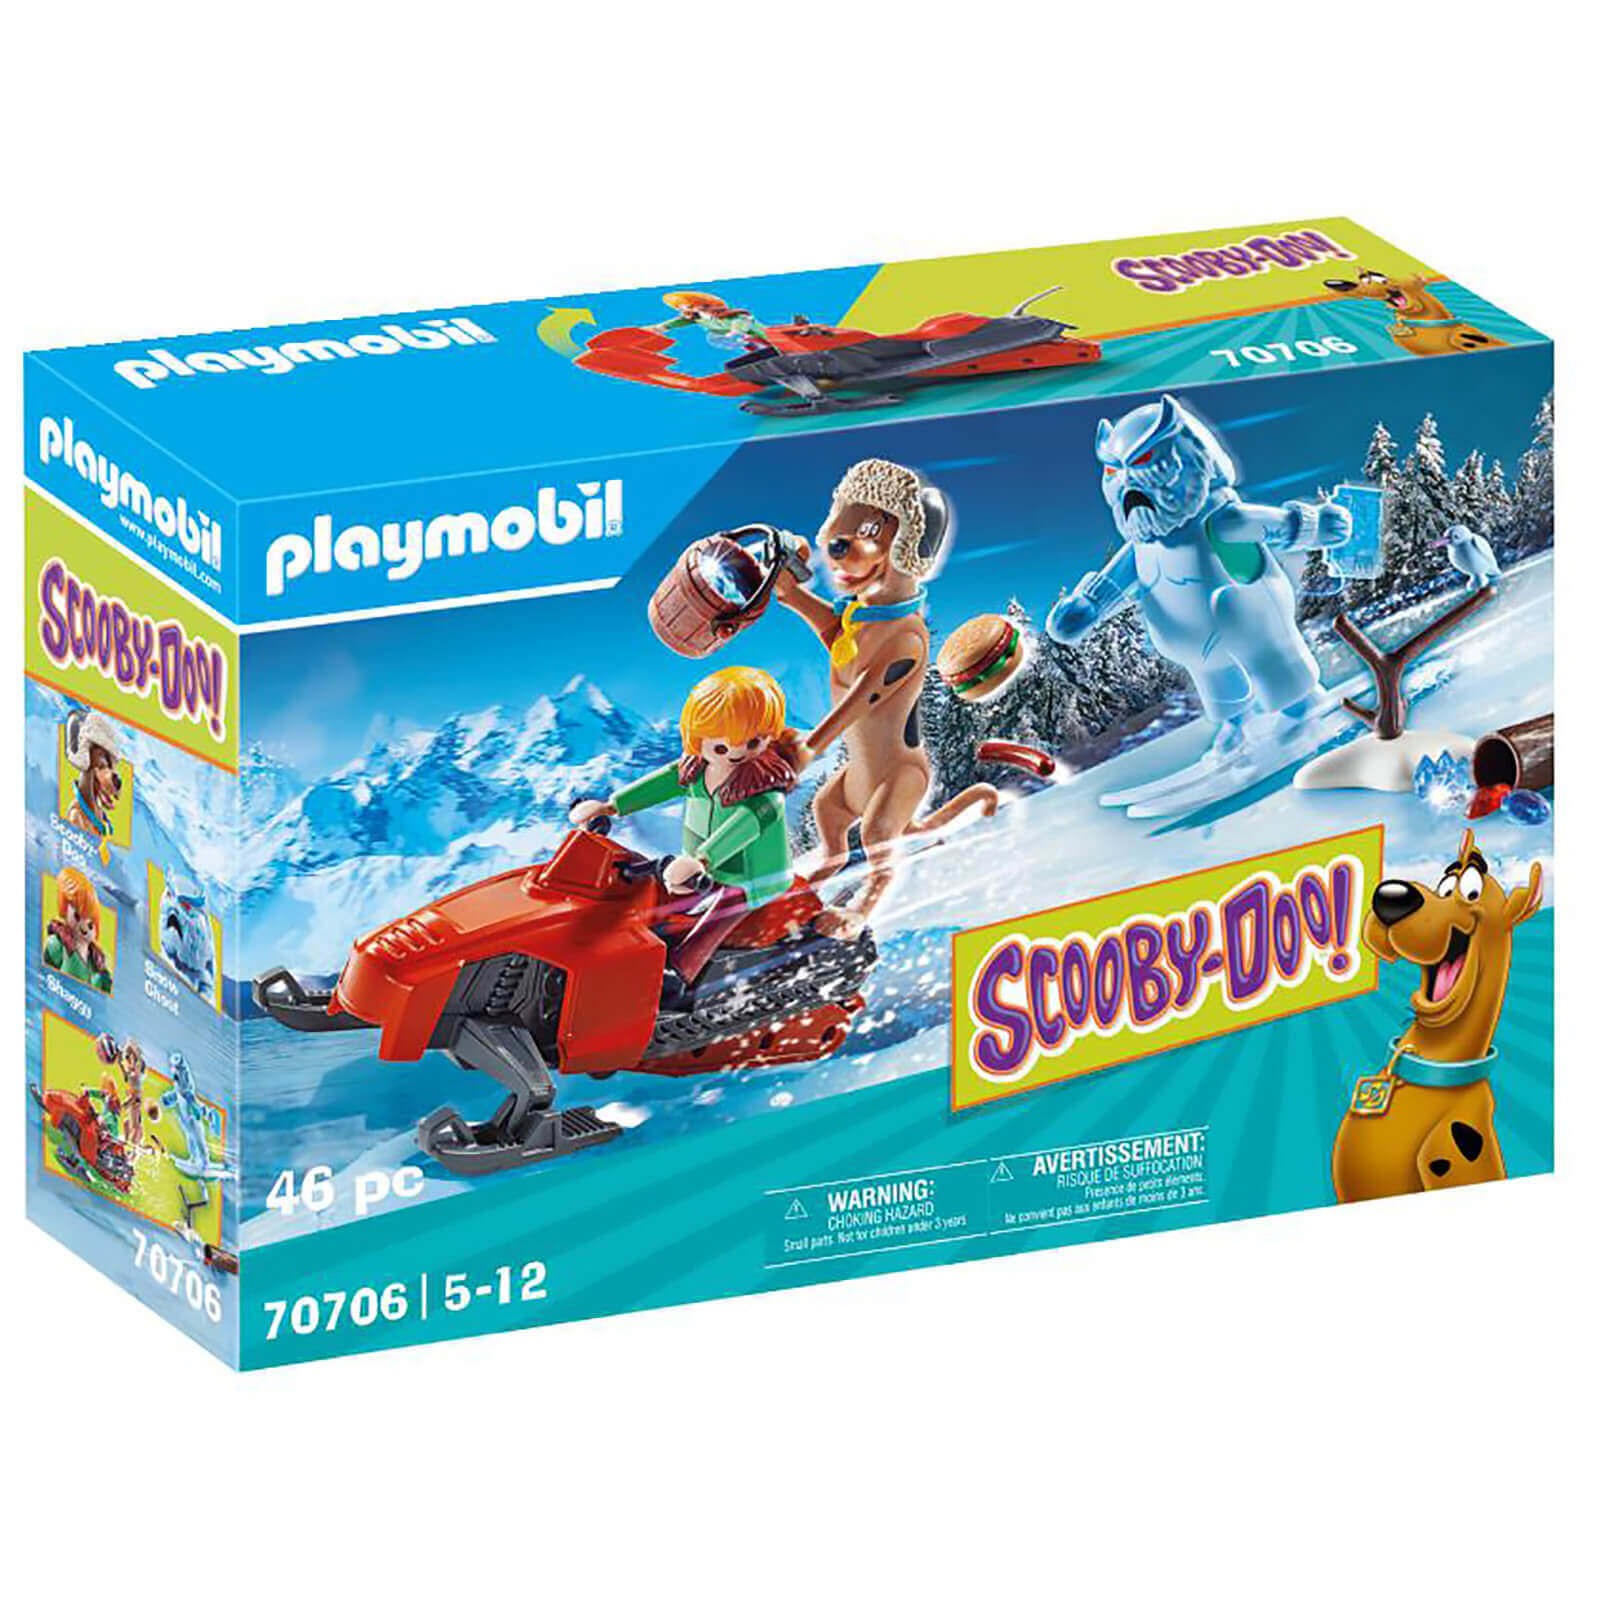 Playmobil SCOOBY DOO! Adventure With Snow Ghost (70706)